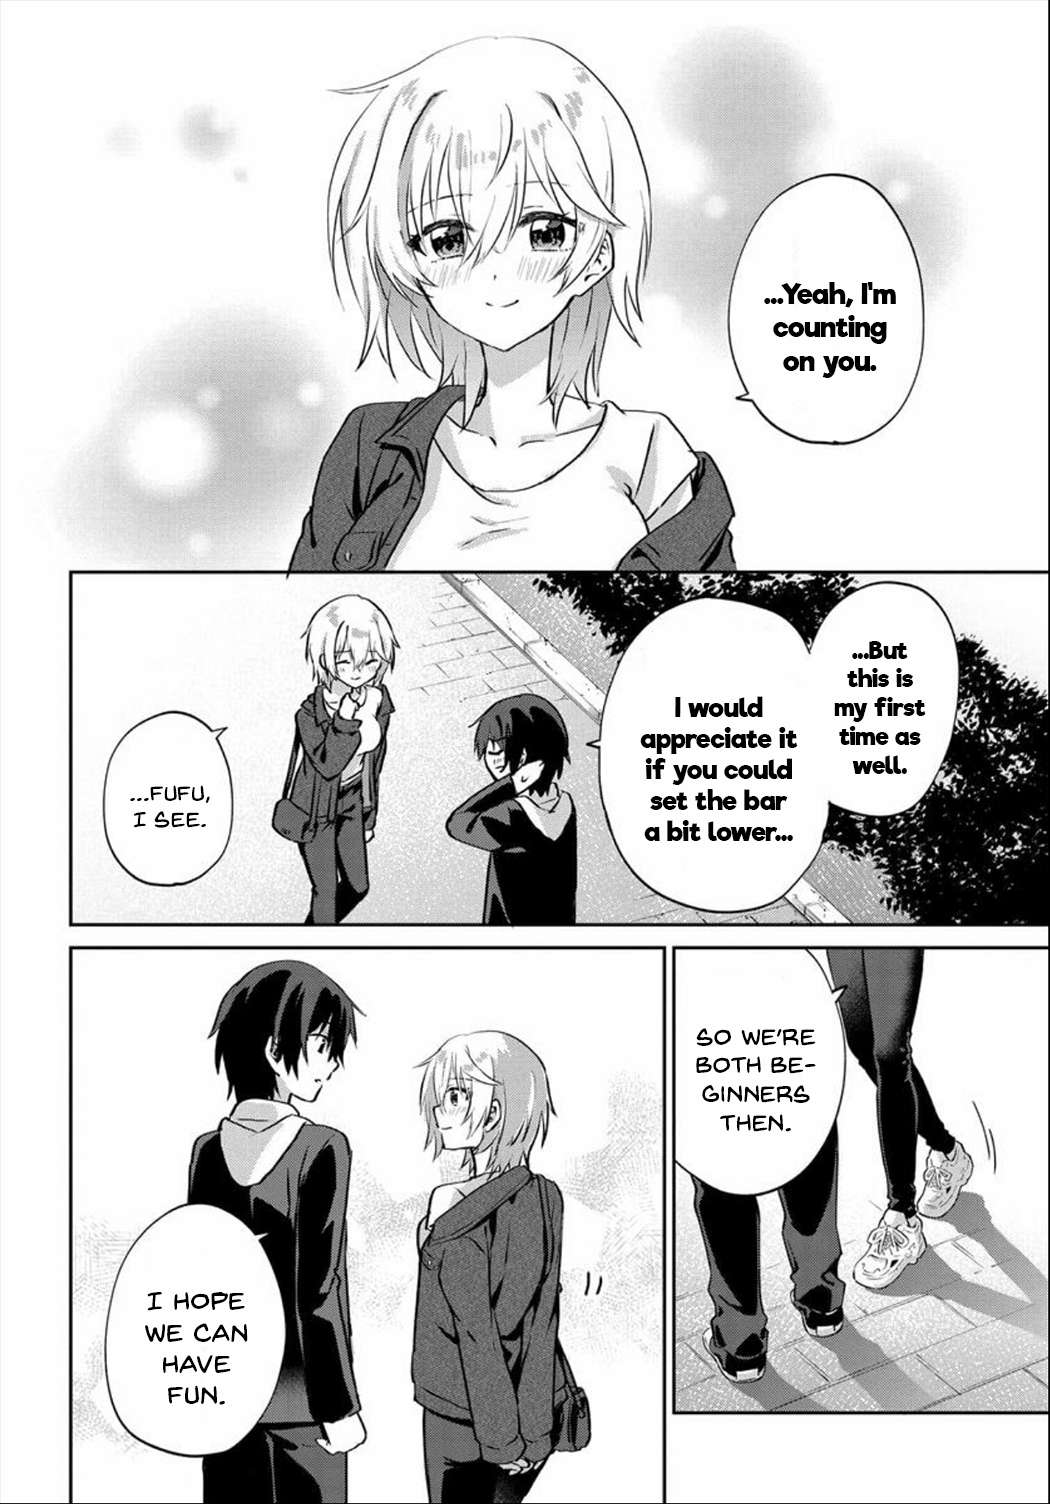 Since I’Ve Entered The World Of Romantic Comedy Manga, I’Ll Do My Best To Make The Losing Heroine Happy - chapter 6.2 - #3